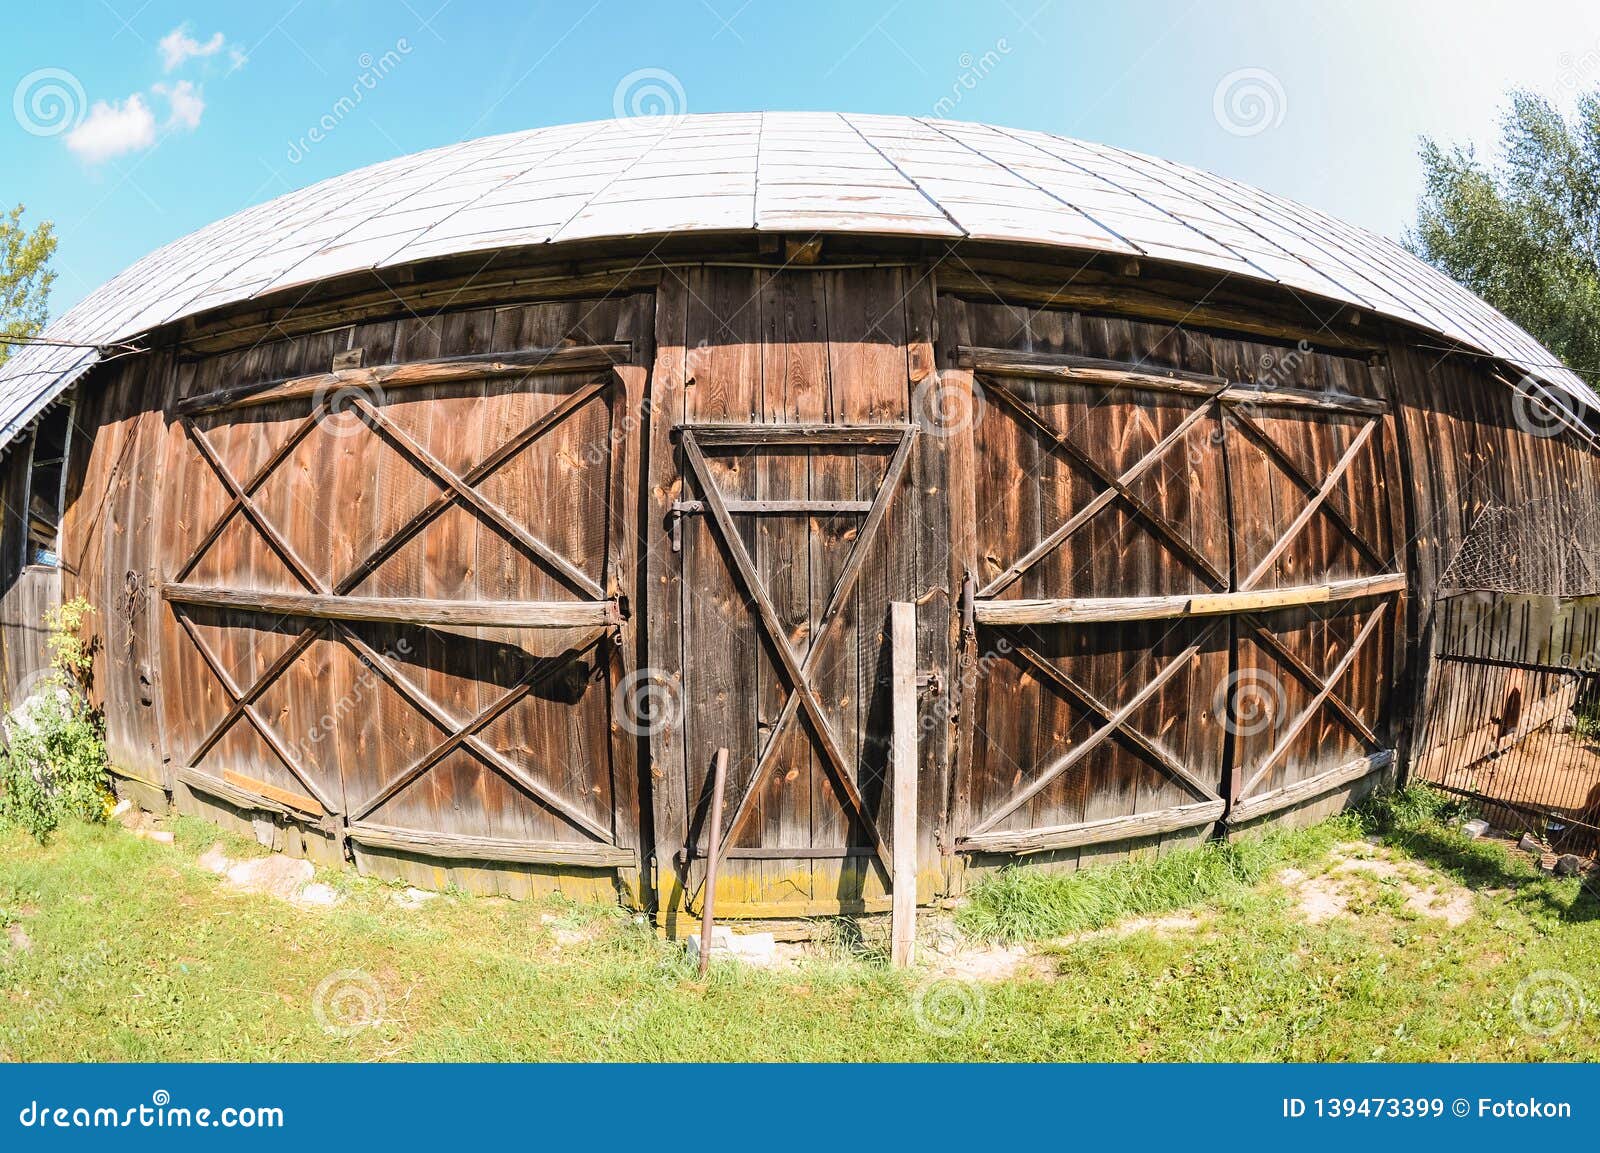 Old Wooden Barn Stock Image Image Of Farmstead